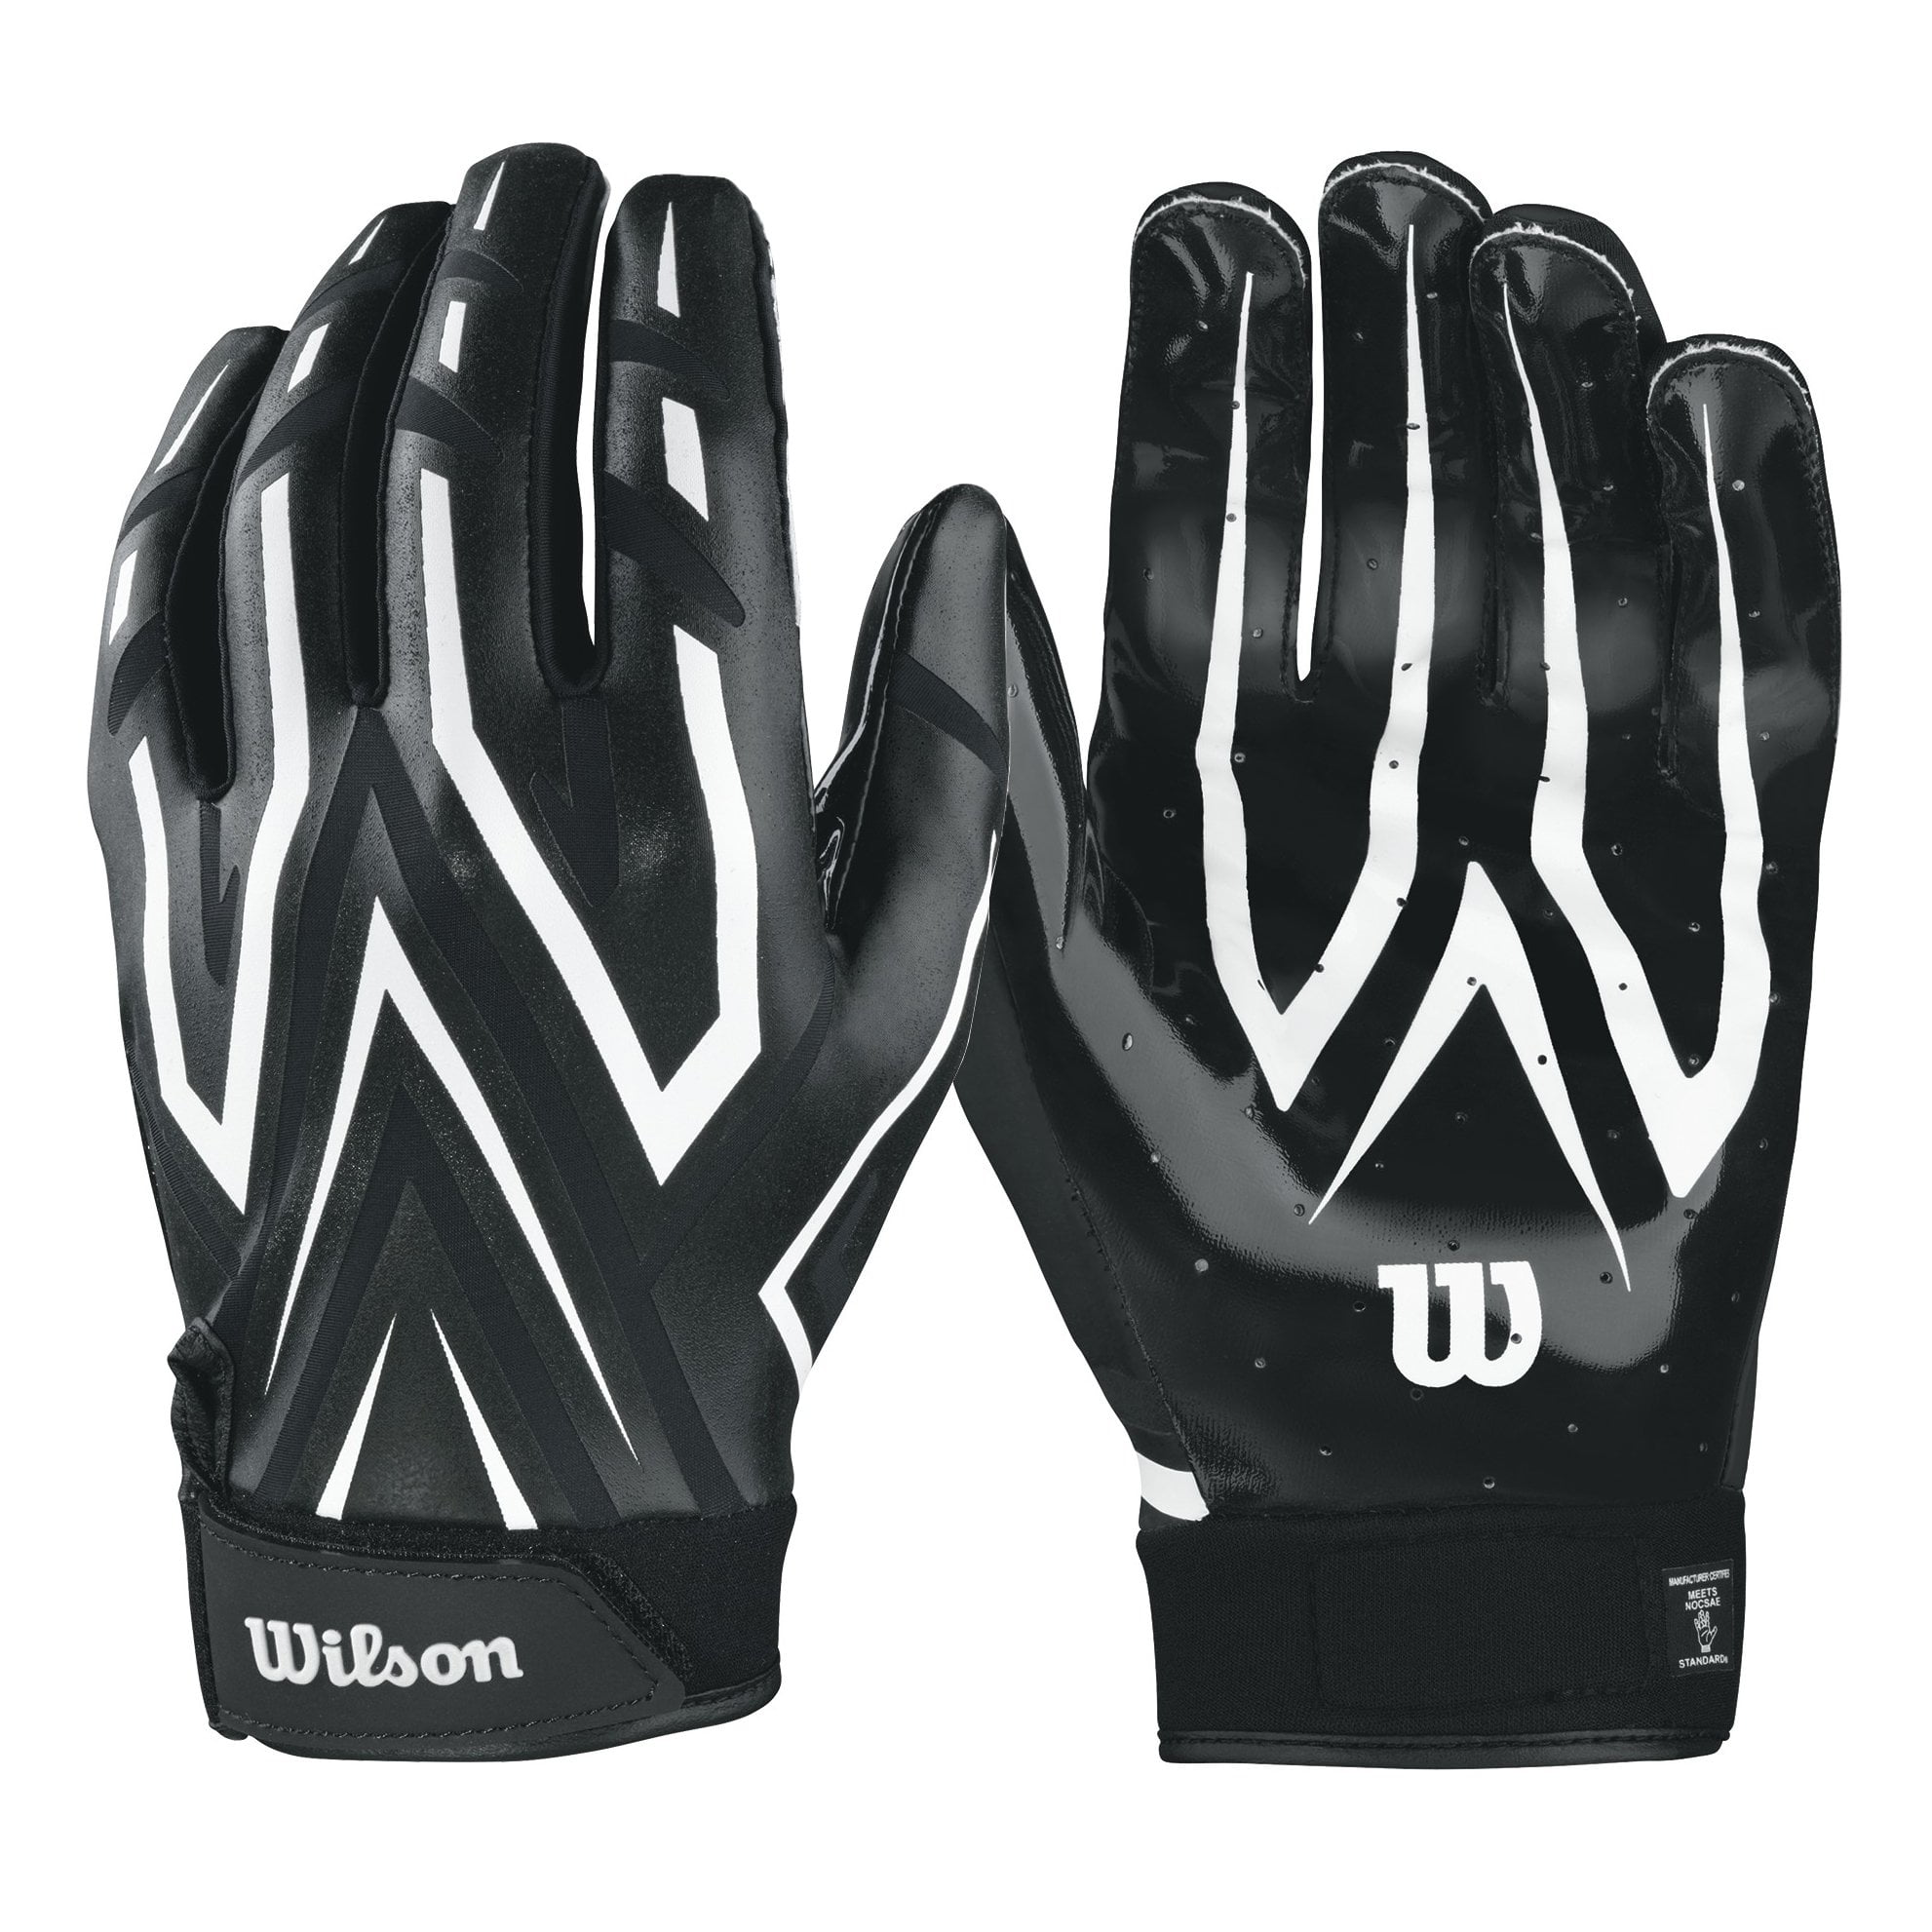 Wilson Adult Receivers Glove with Ribbon